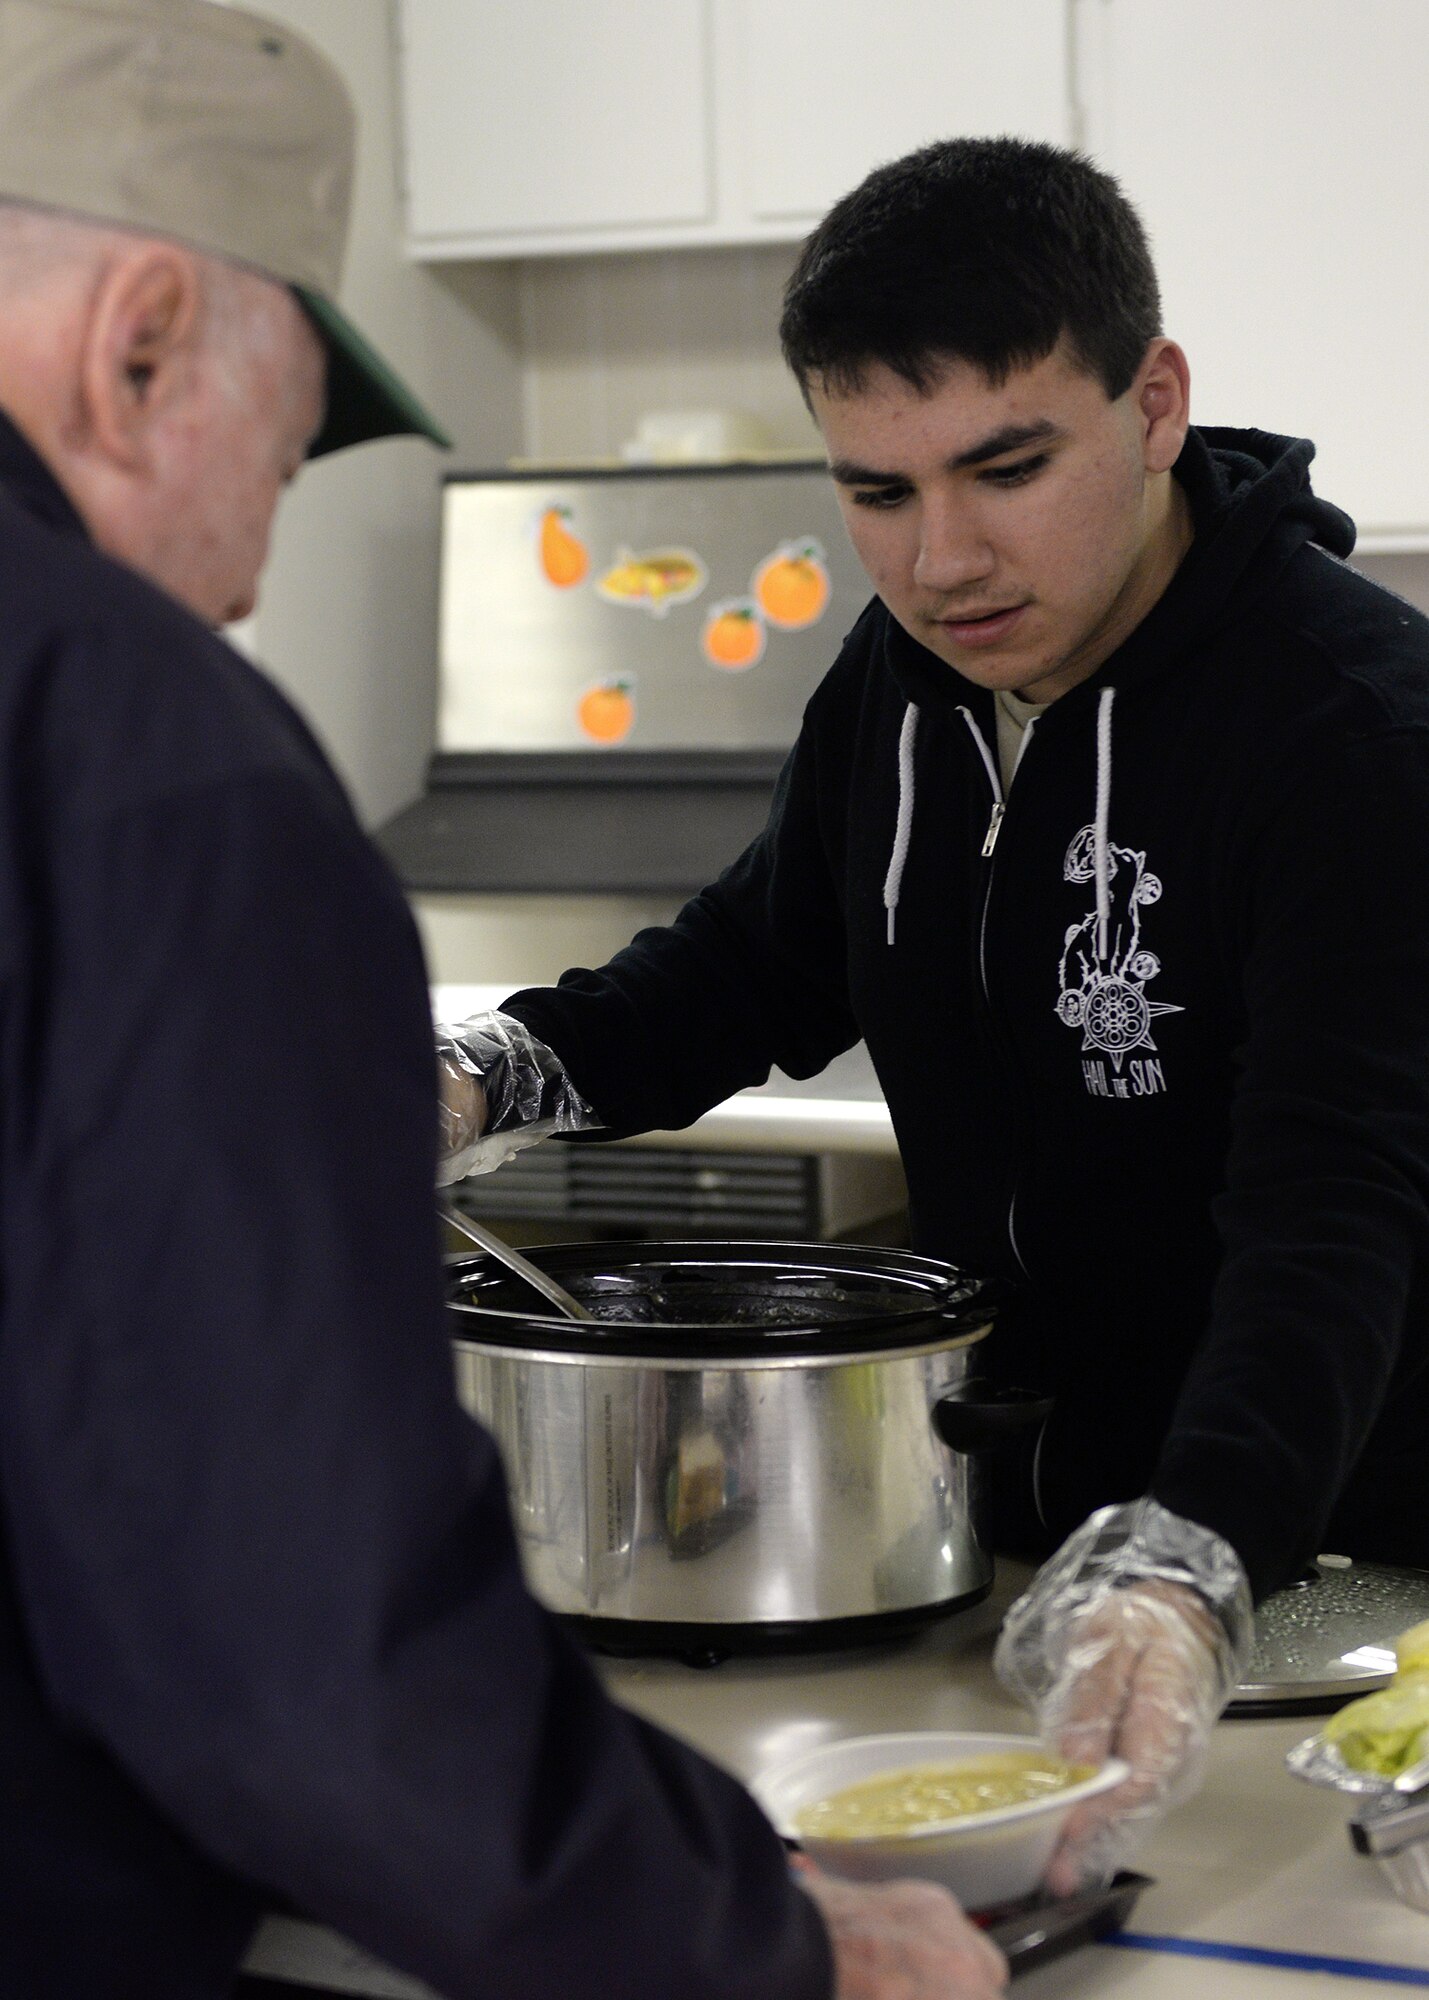 ALTUS AIR FORCE BASE, Okla. – U.S. Air Force Senior Airman Josenan Cruz, 97th Medical Group Tricare operations and patient administration clerk, serves a bowl of soup at the Salvation Army Soup Kitchen, Jan. 8, 2015. Over the course of four hours, Cruz and five other Airmen helped serve sandwiches, soup and dessert to more than 50 individuals in need. (U.S. Air Force photo by Senior Airman Levin Boland/Released)